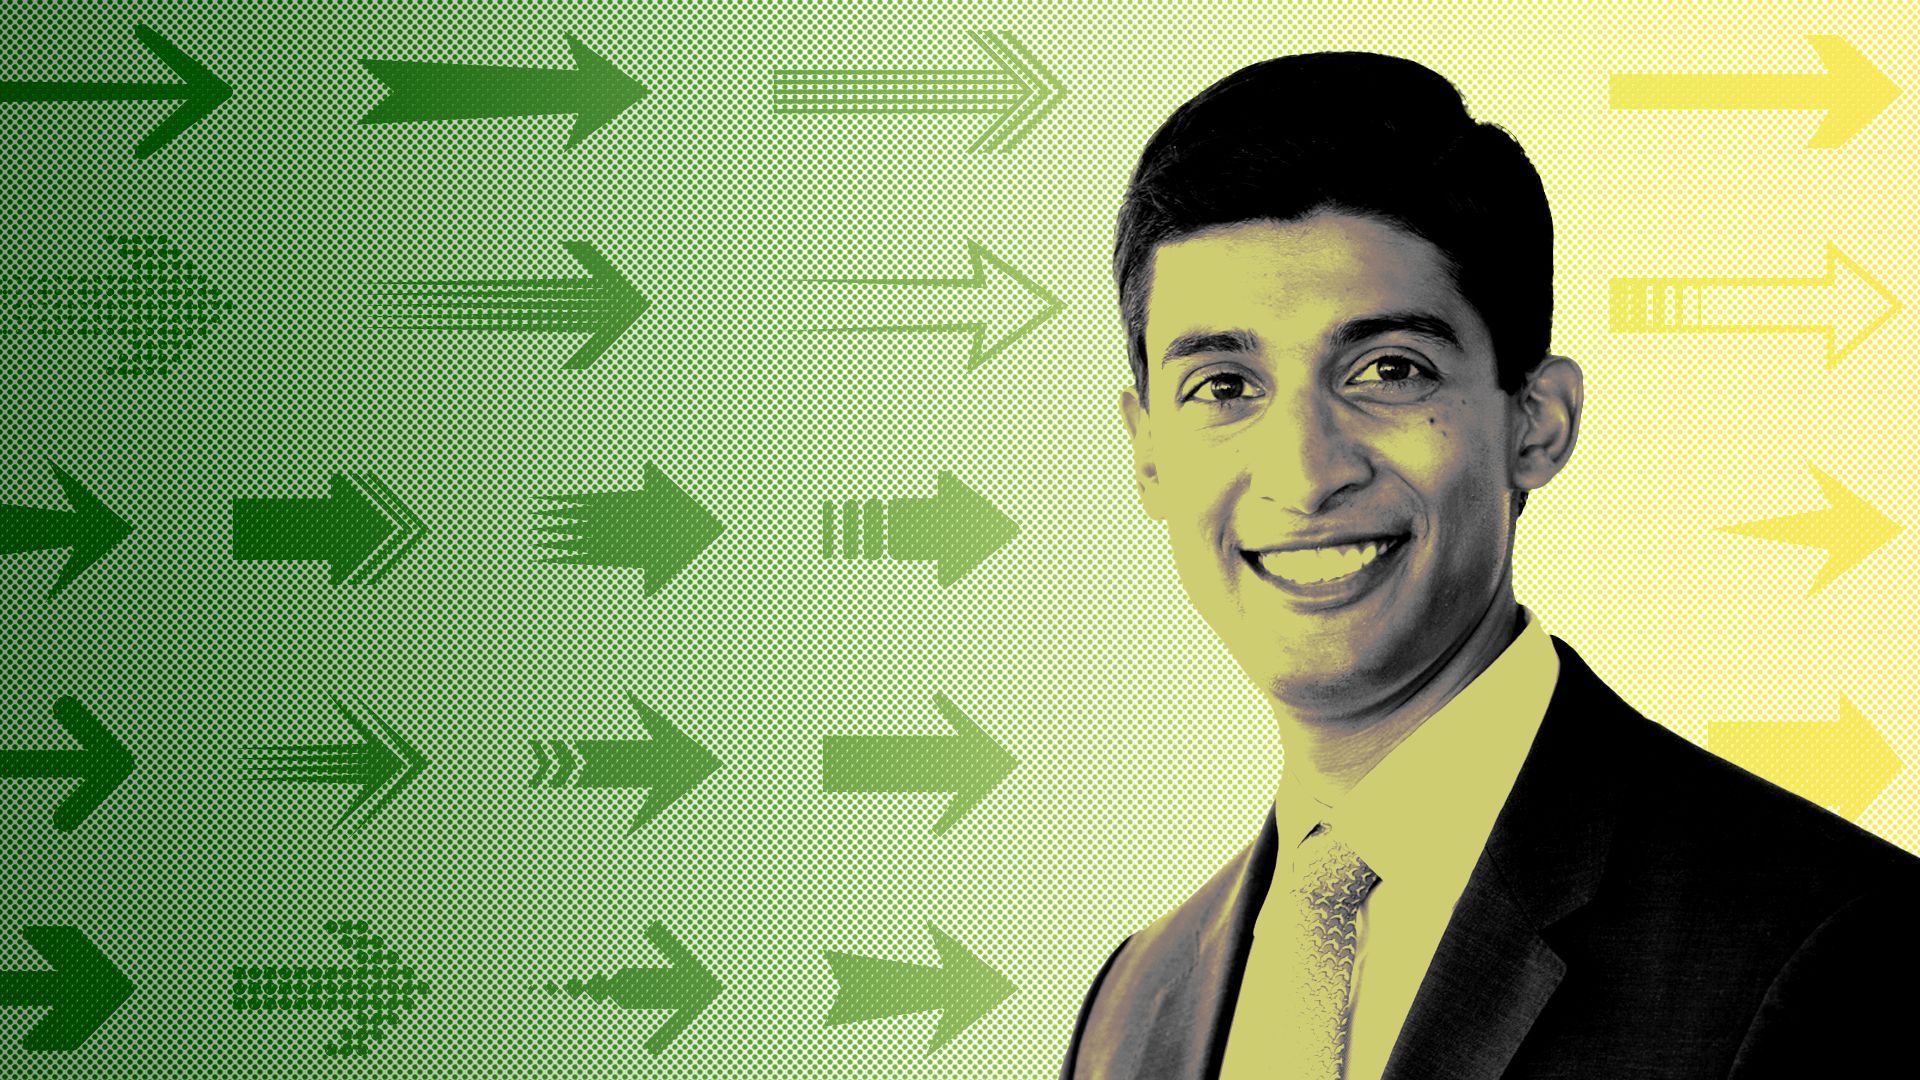 Photo illustration of Varun Sivaram with arrows pointing to the right.